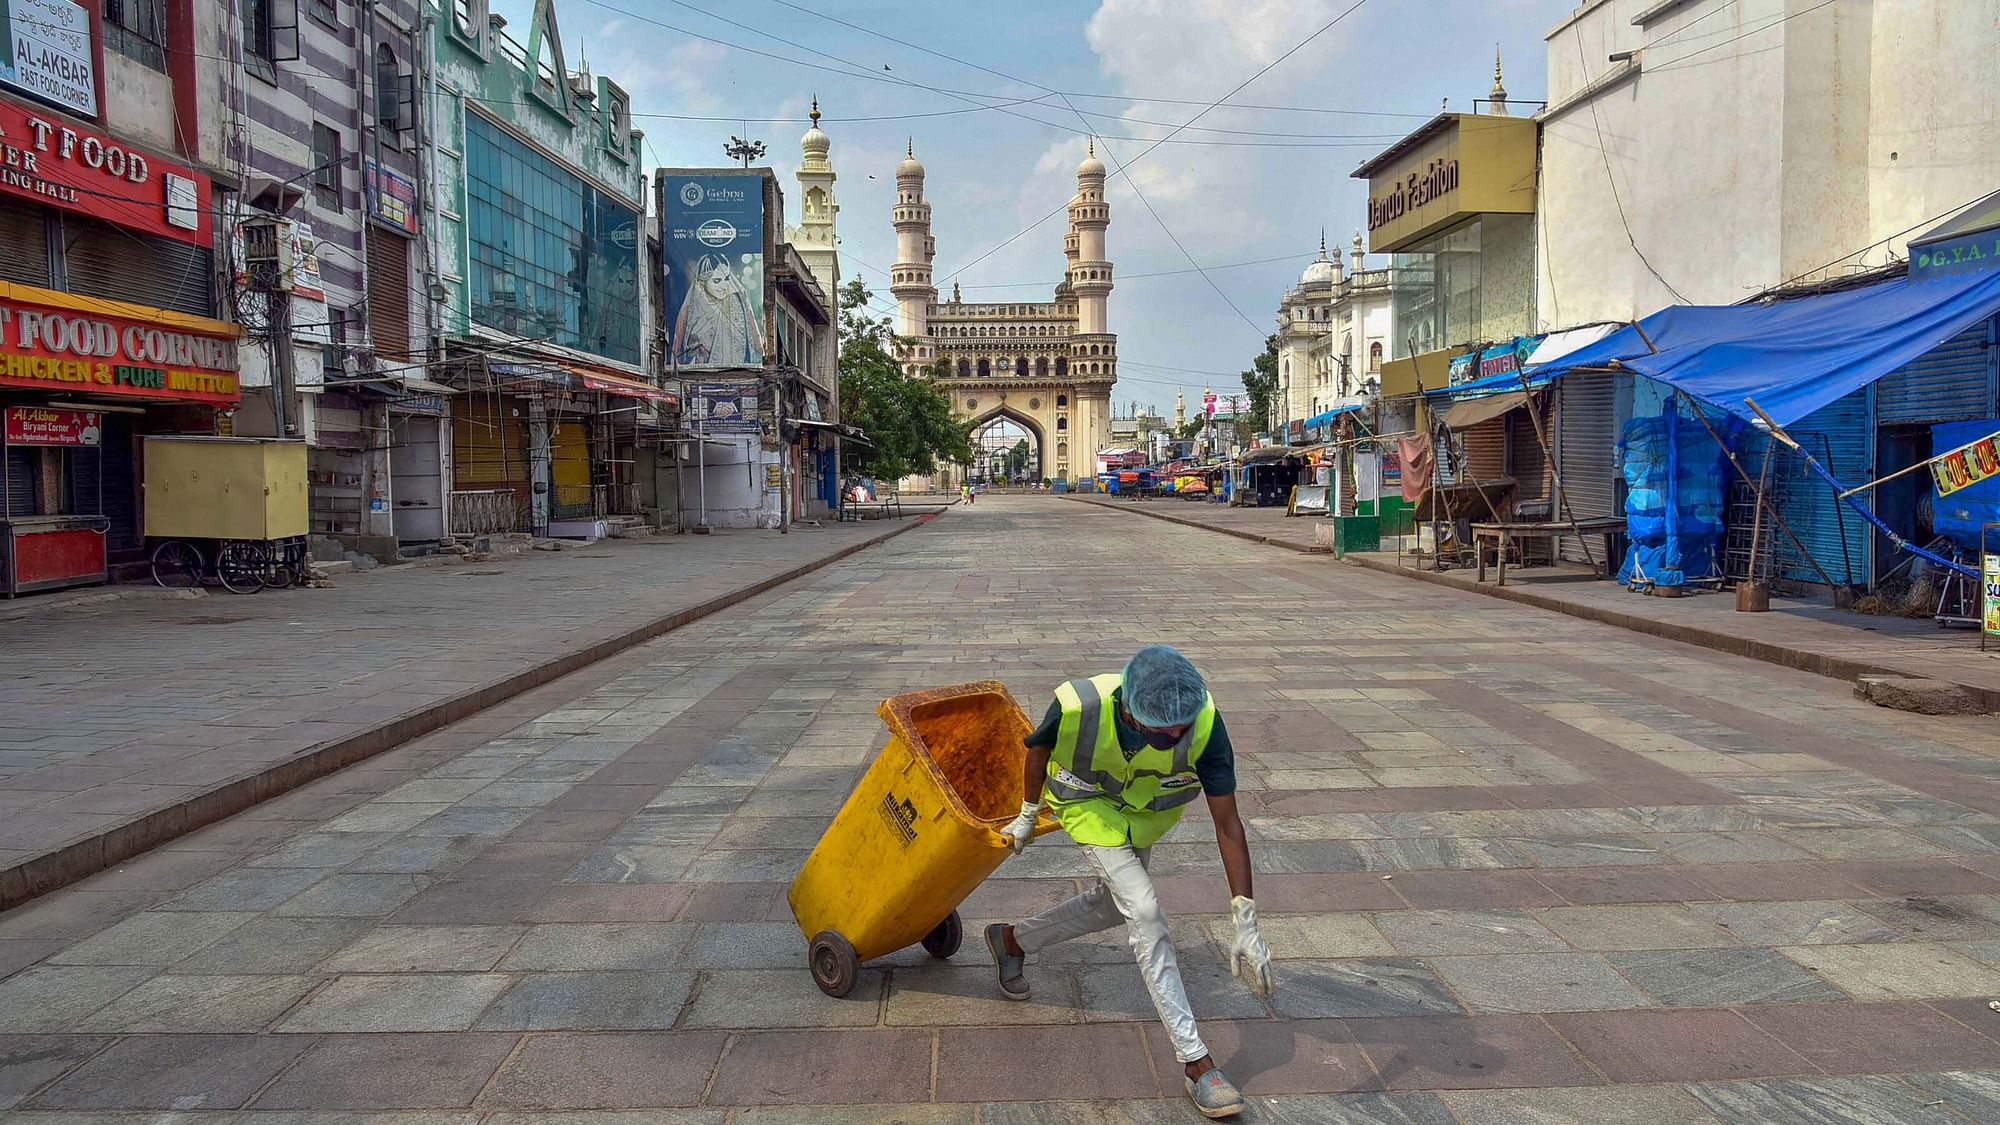  A GHMC worker cleans an area during the nationwide lockdown, imposed in wake of the coronavirus pandemic, in the old city of Hyderabad, Tuesday, 7 April, 2020.